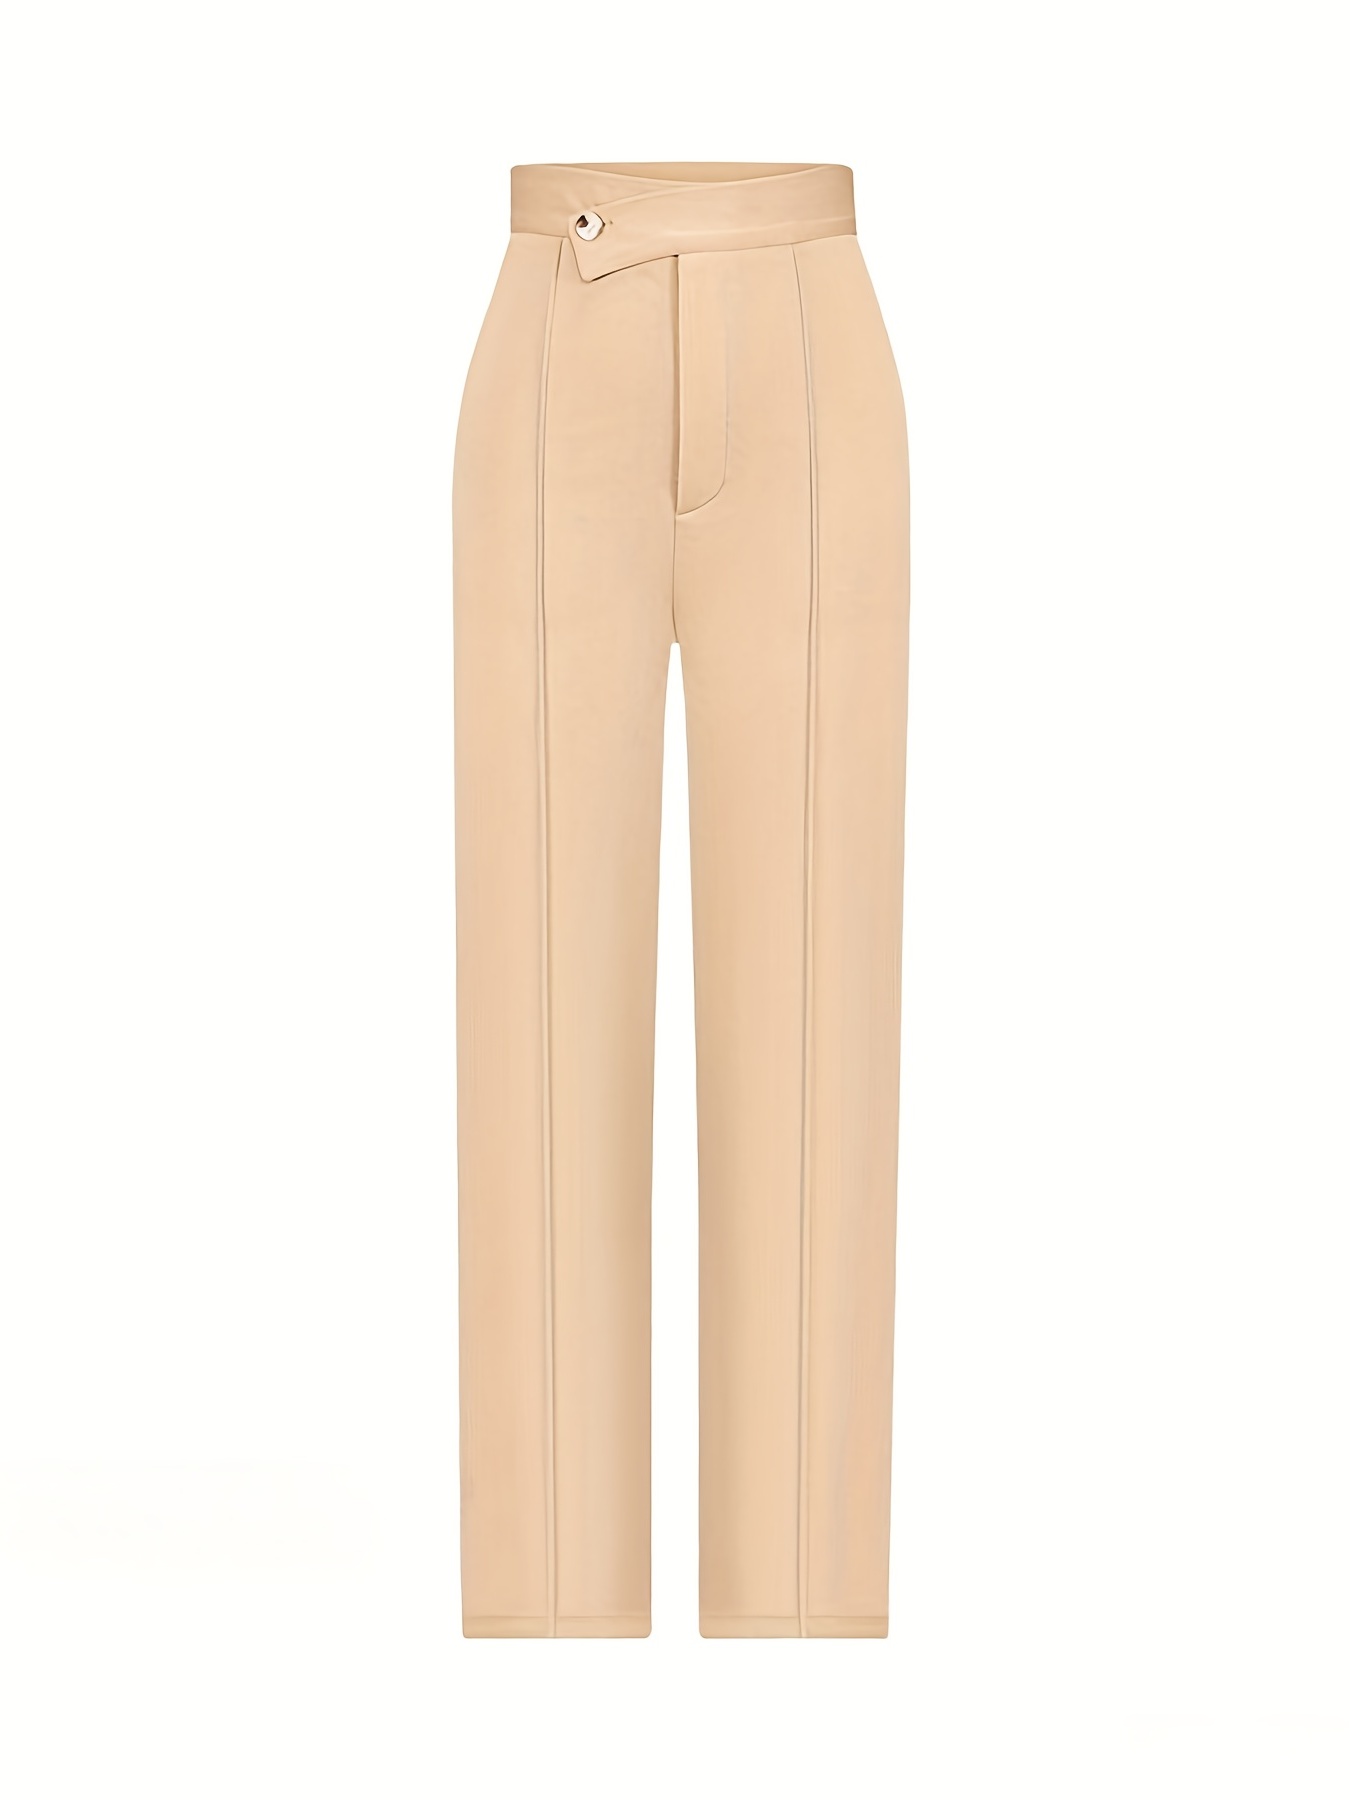 Women's Plus Size Solid High Waist Skinny Pants Work Office Long Trousers  With Pocket 1XL(14)